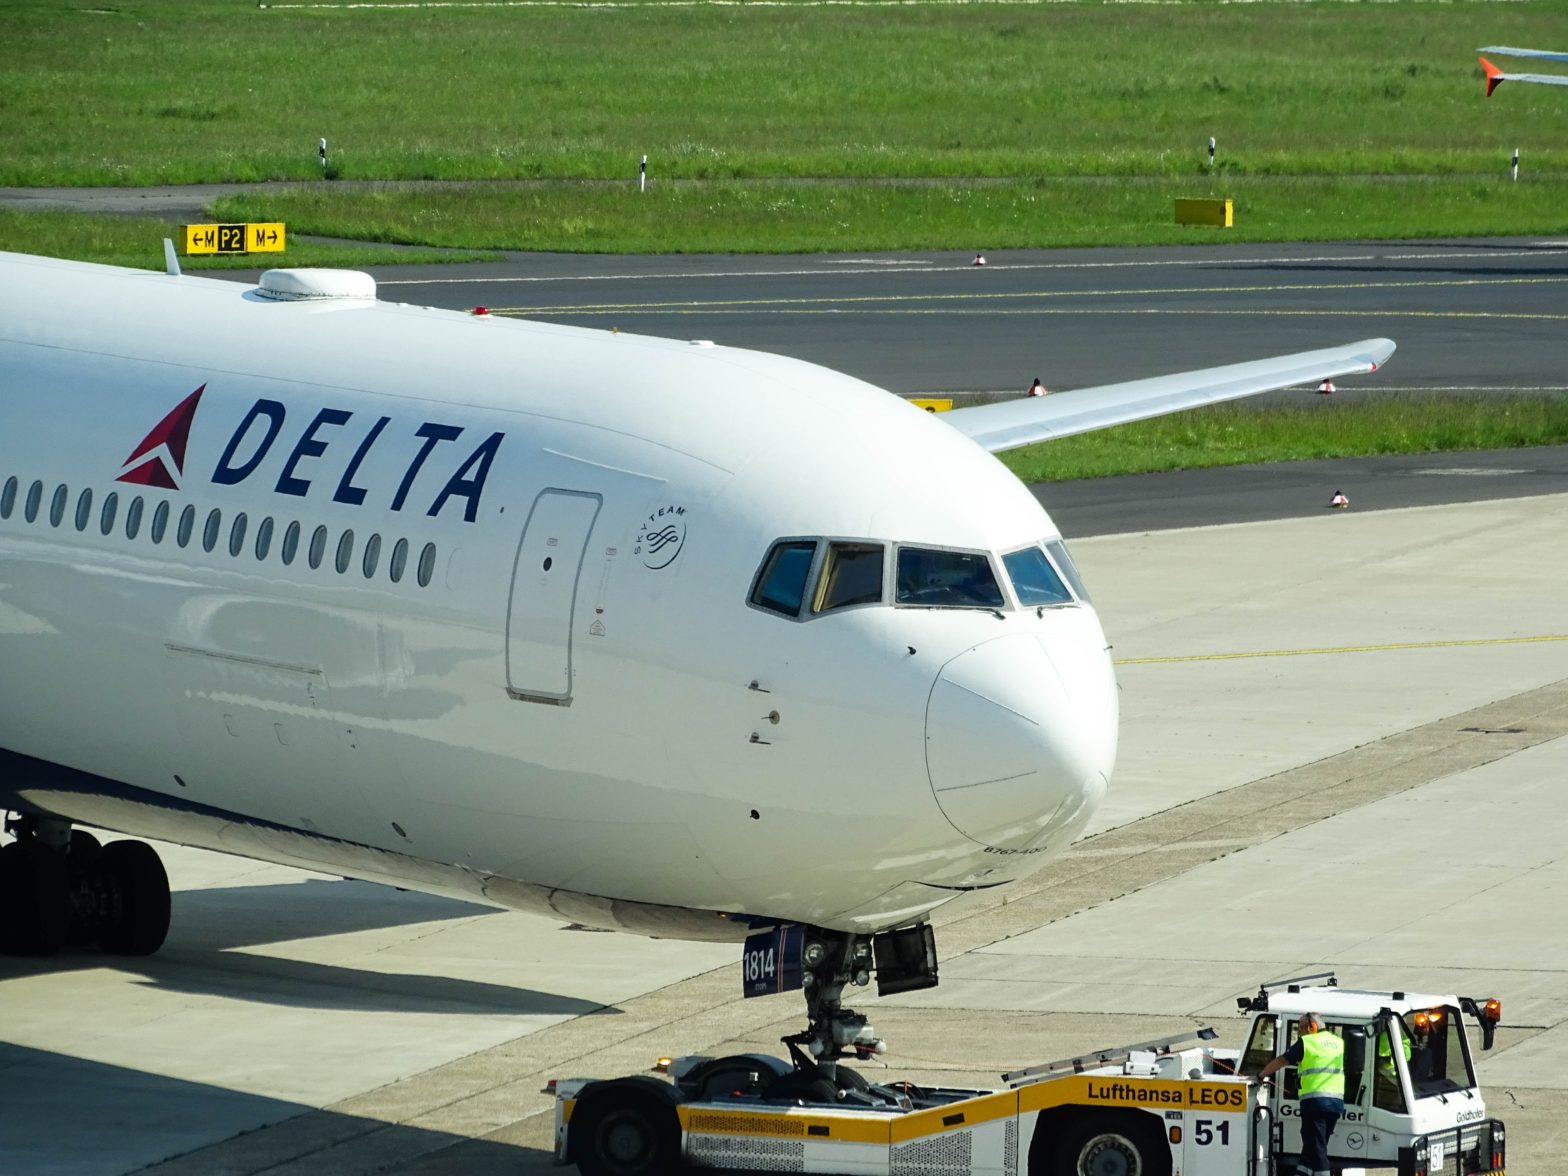 Delta May Offer Free Wi-Fi In 2023, According To Forbes